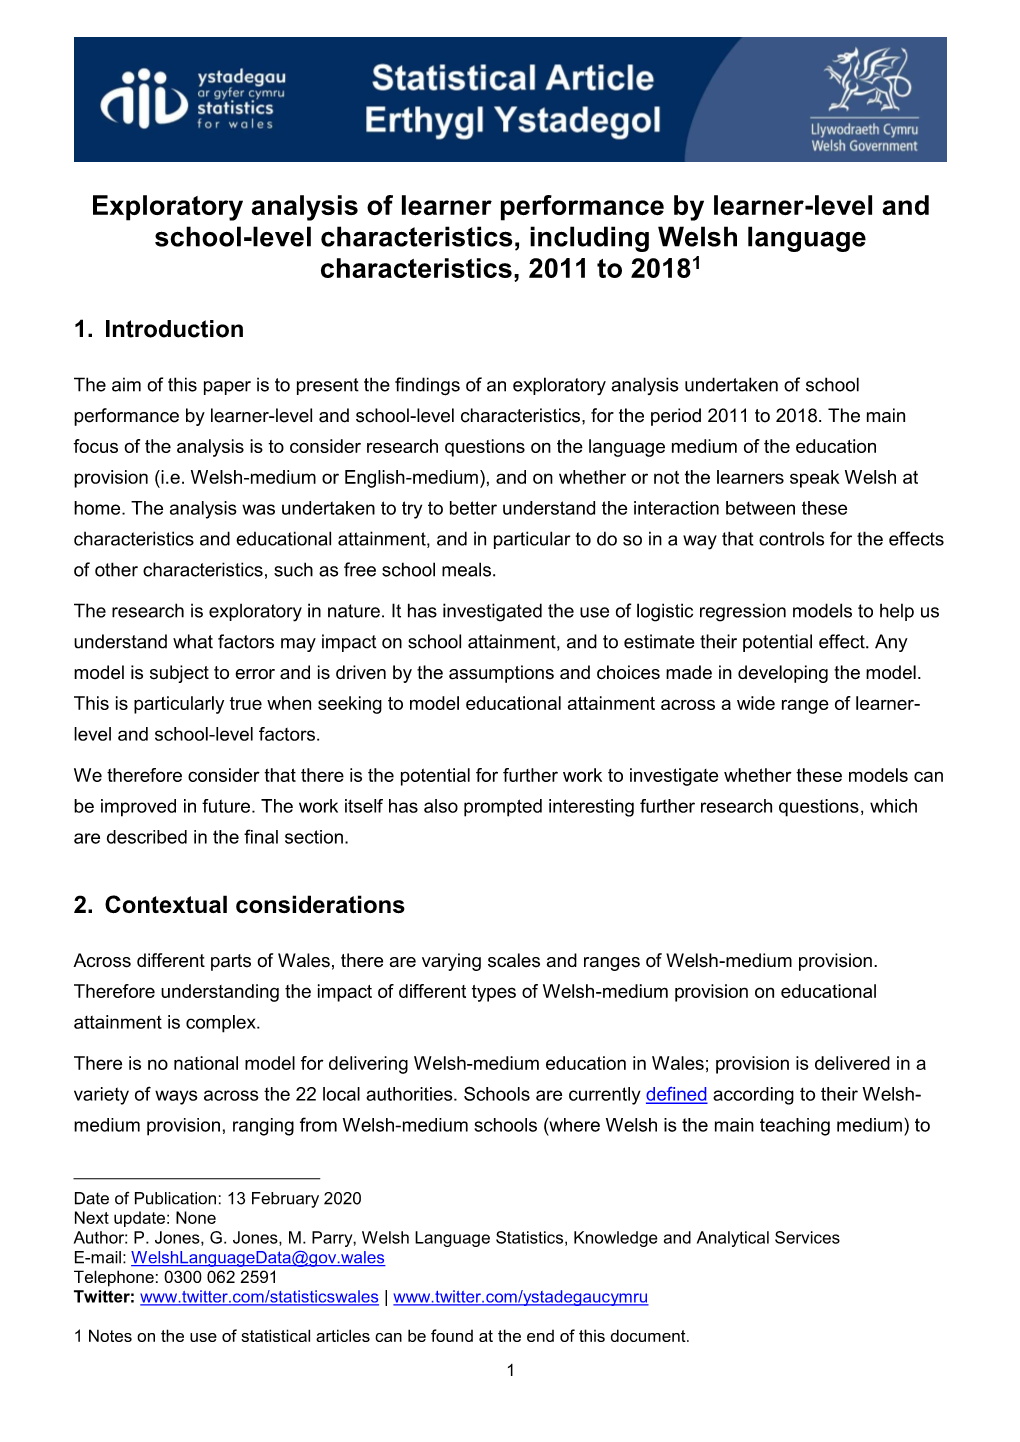 Exploratory Analysis of Learner Performance by Learner-Level and School-Level Characteristics, Including Welsh Language Characteristics, 2011 to 20181